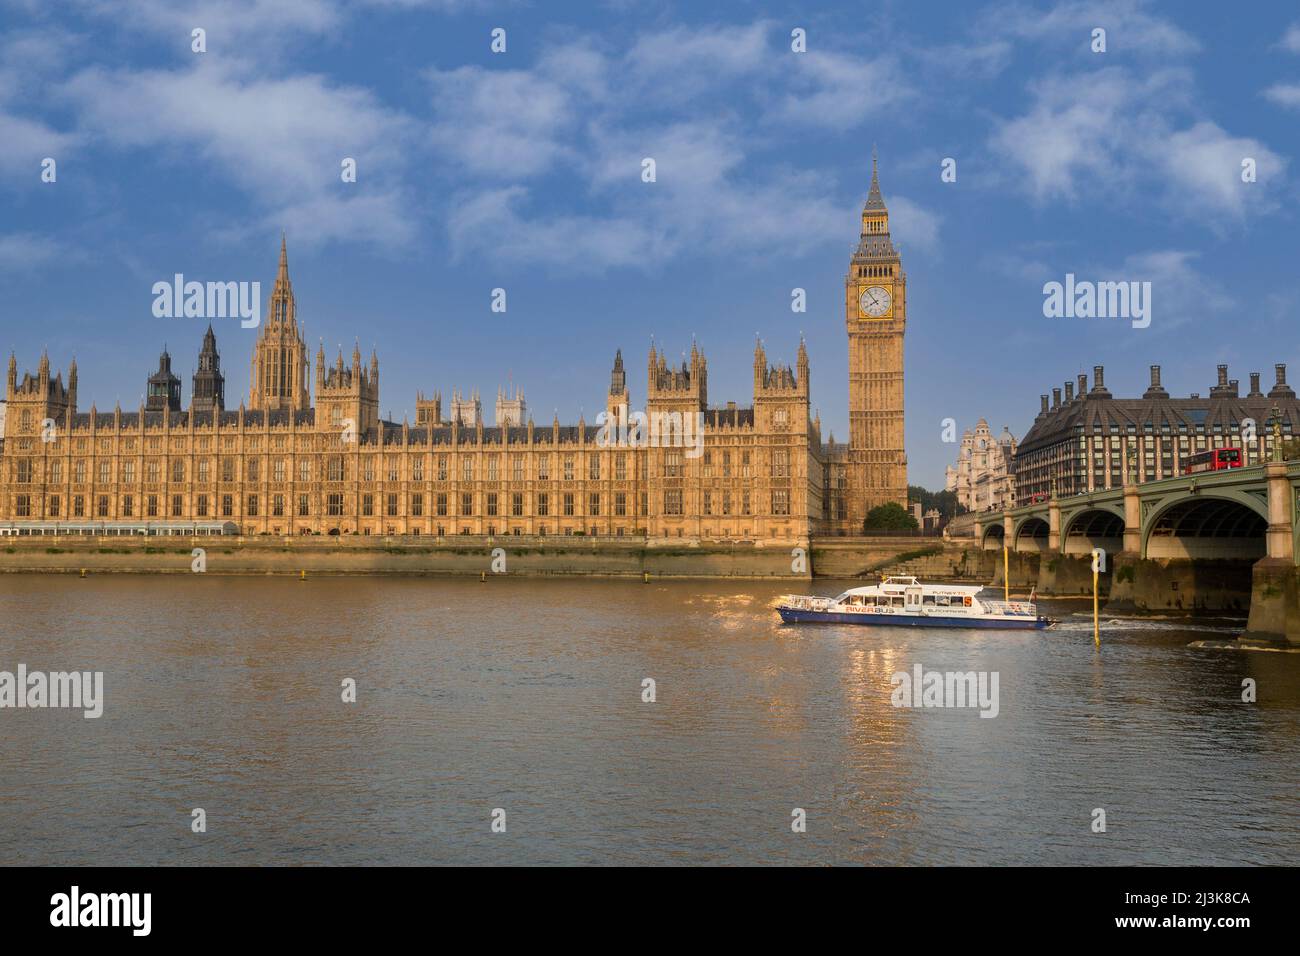 UK, England, London.  Big Ben, Elizabeth Tower, Westminster palace, Thames River, Early Morning.  Portcullis Parliament Office Building on right. Stock Photo